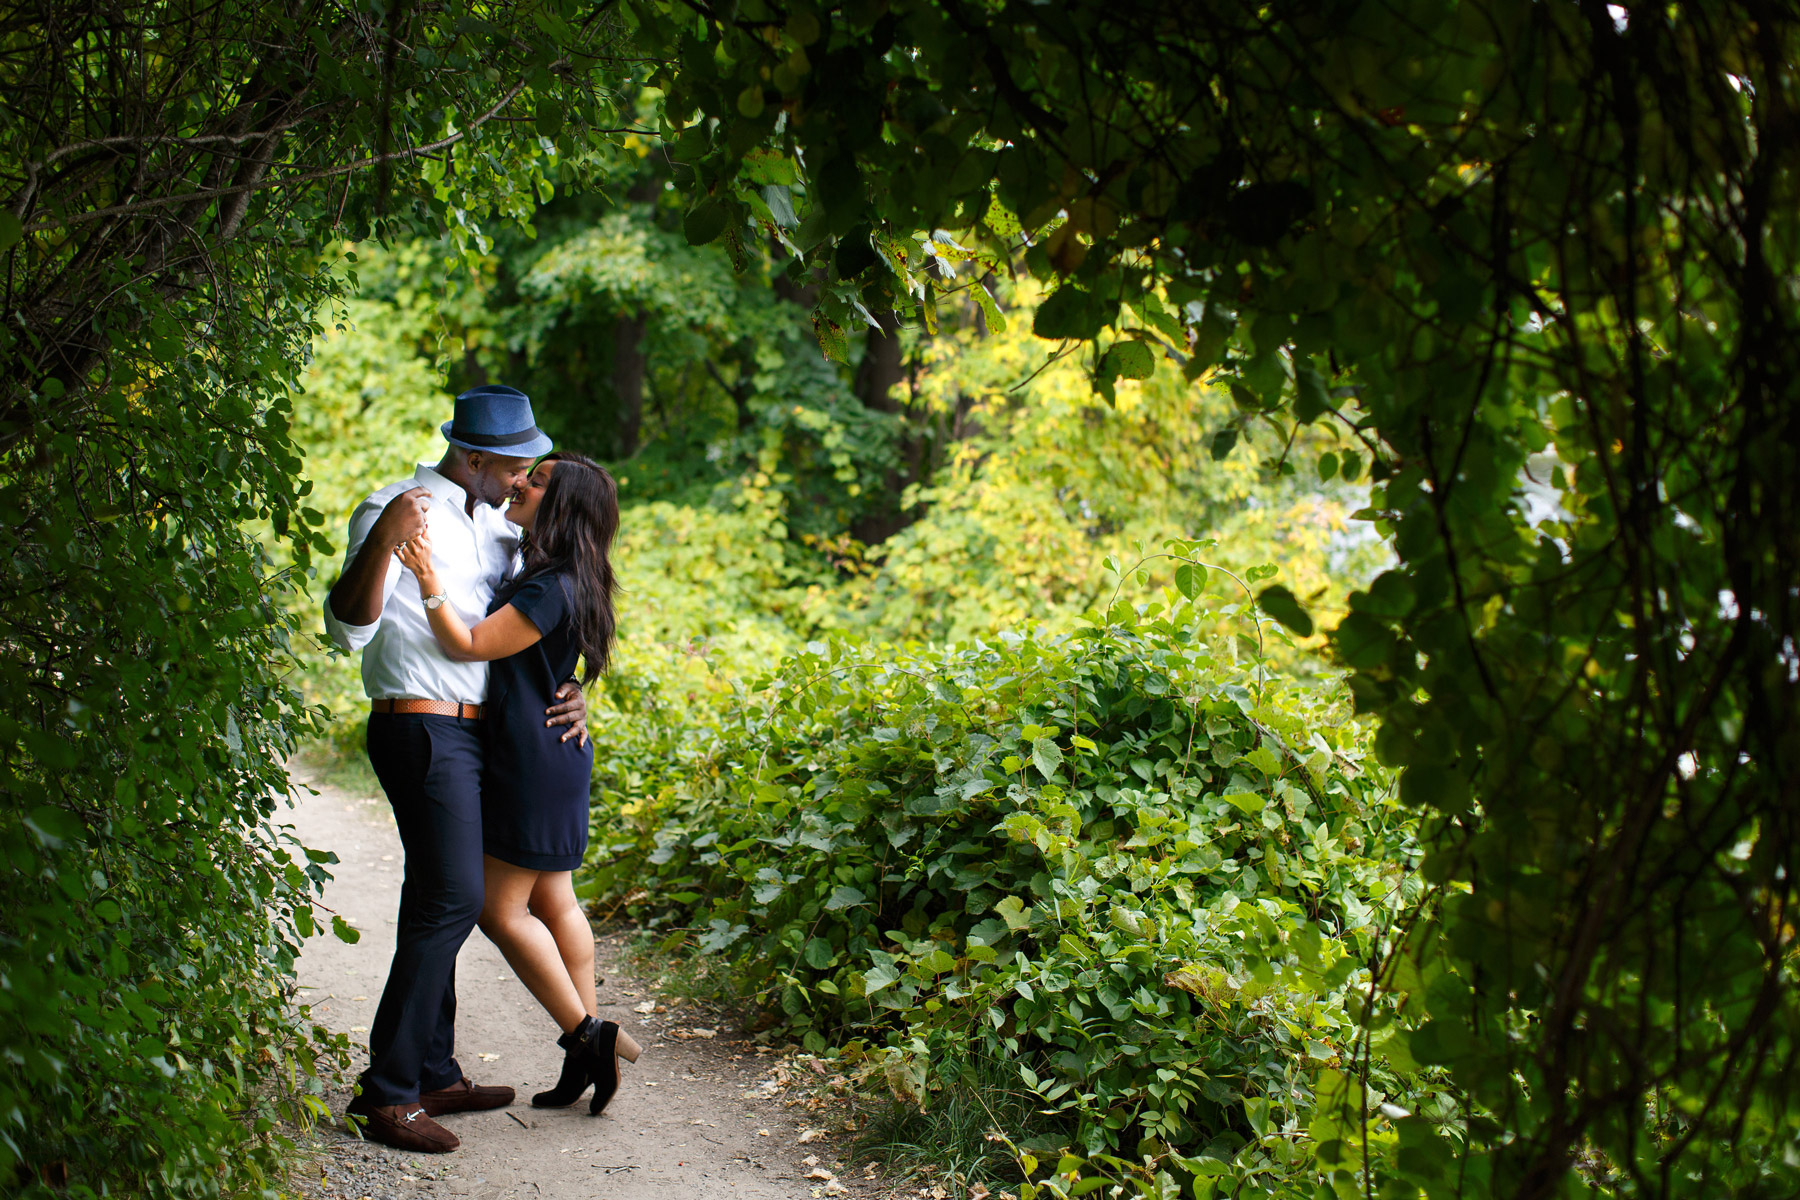 outdoors engagement photography ideas in ottawa ontario